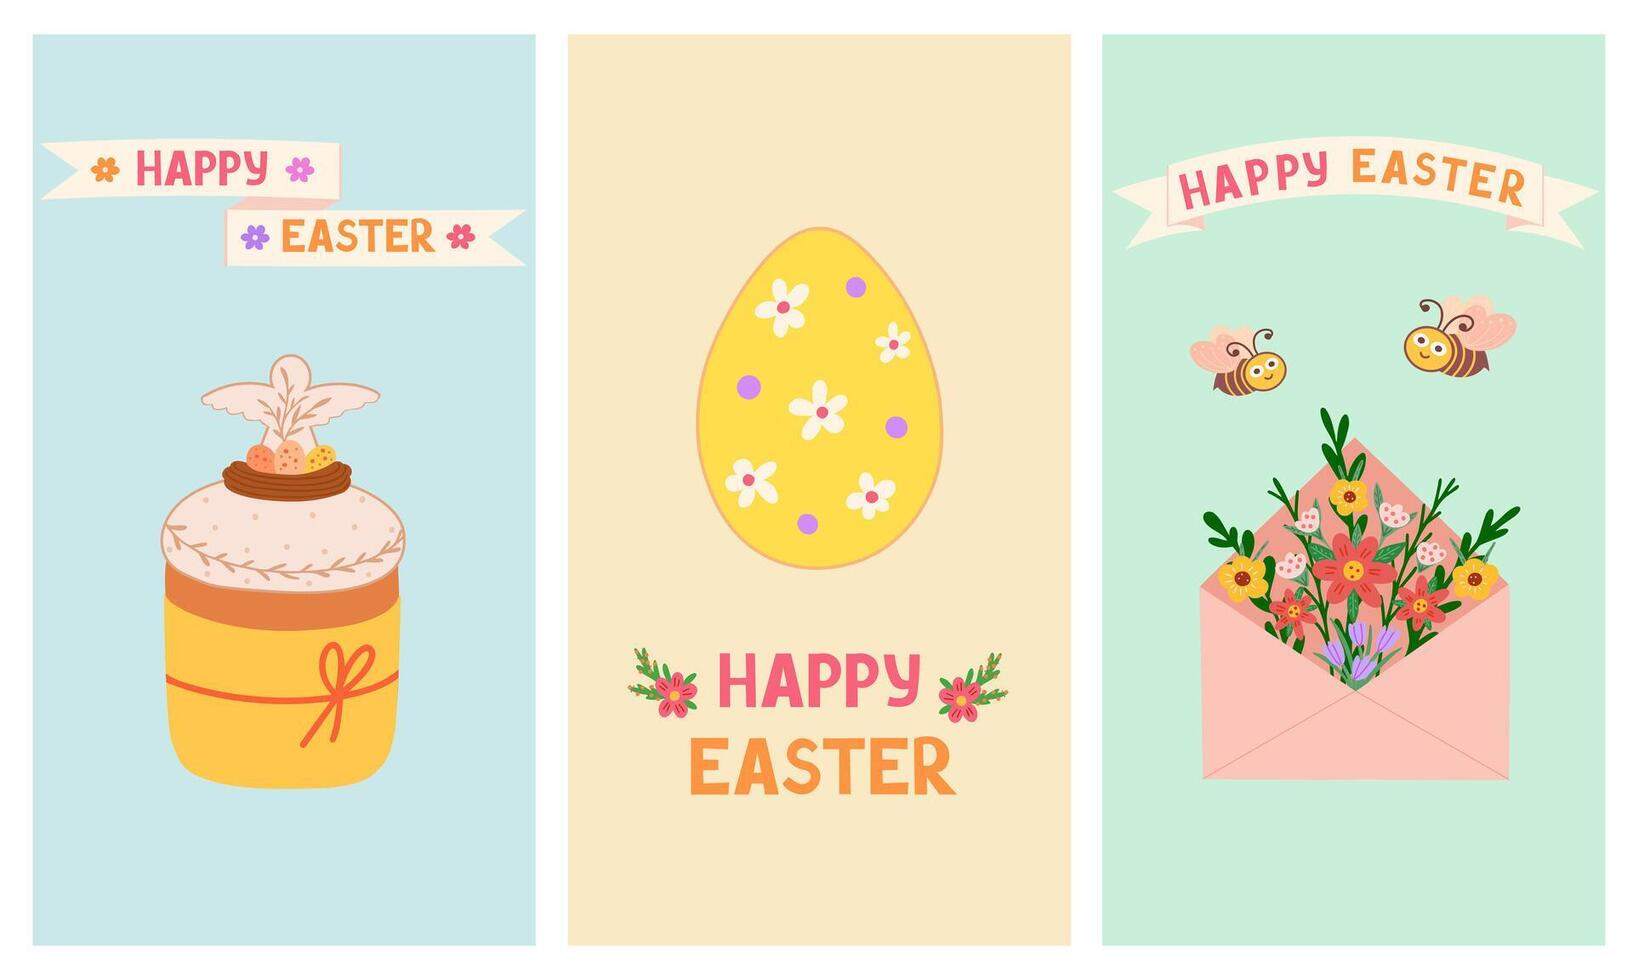 Happy Easter greeting cards, Easter egg, envelope with flowers, cake with angel. Illustration for backgrounds and packaging. Image can be used for cards, posters. Isolated on white background. vector